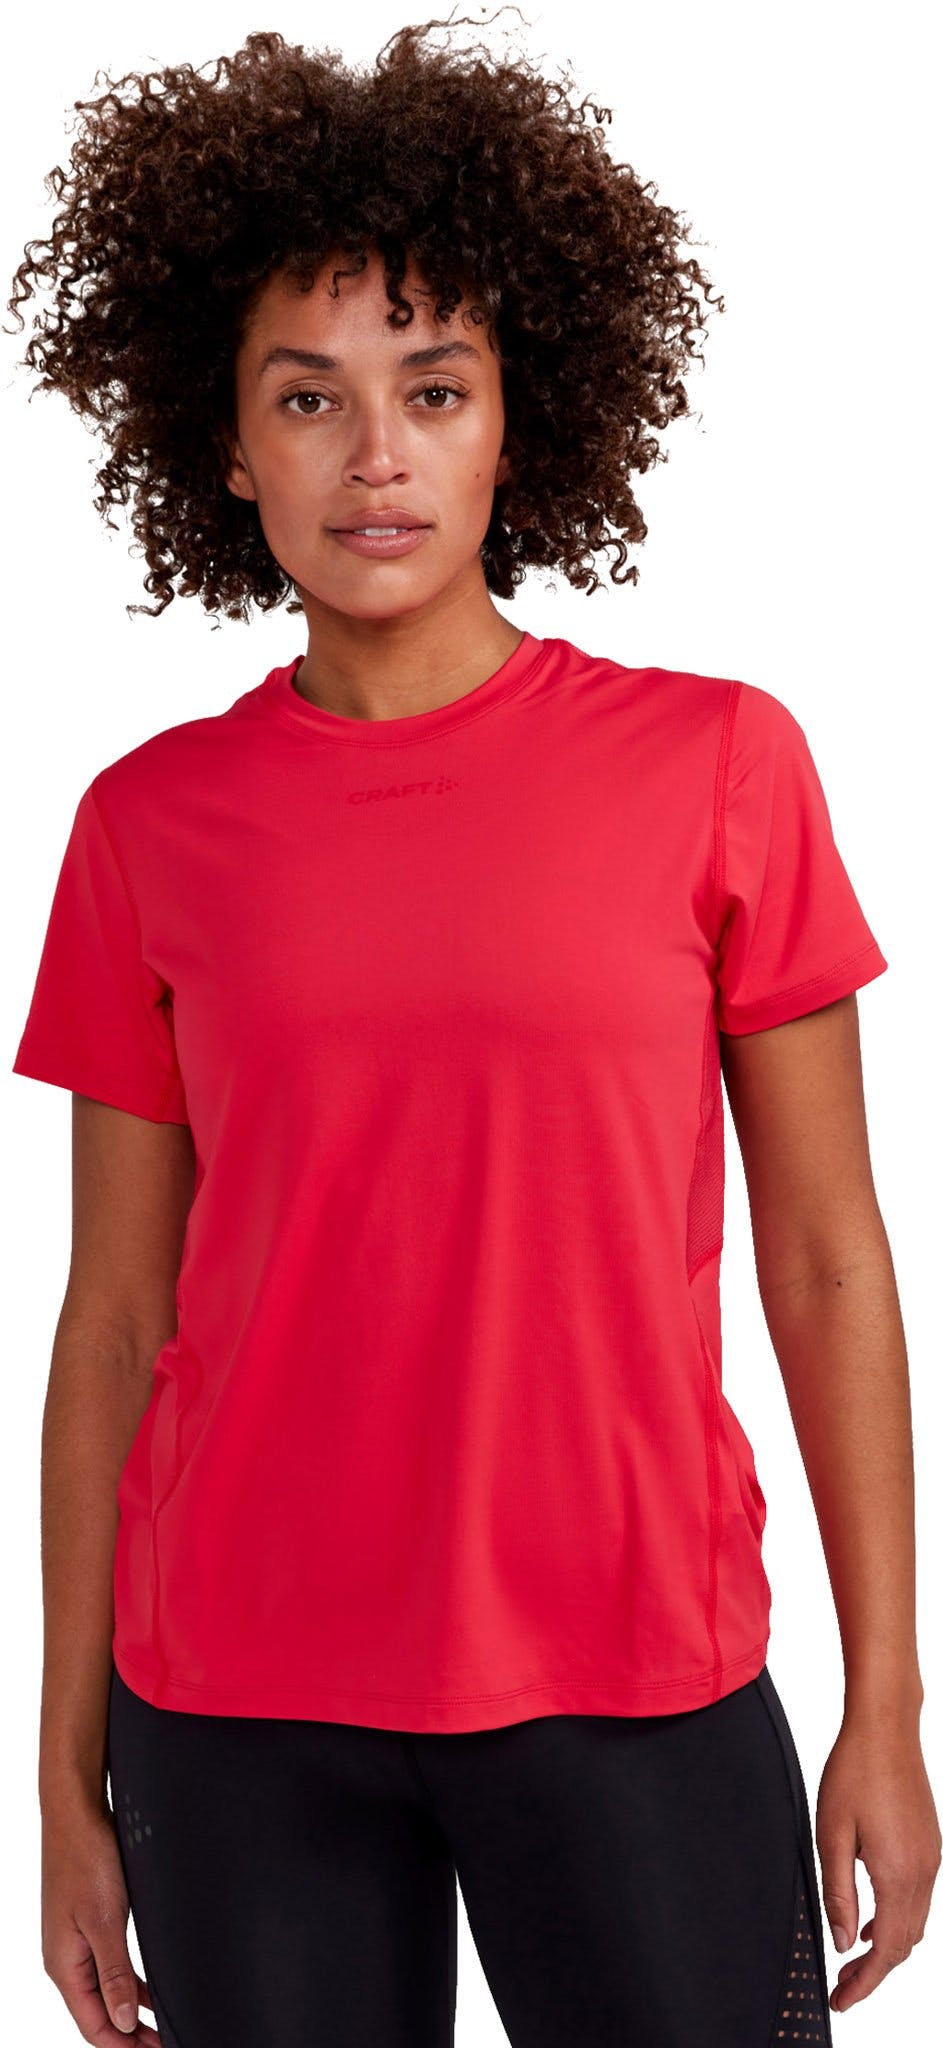 Product image for ADV Essence Short Sleeve T-Shirt - Women's